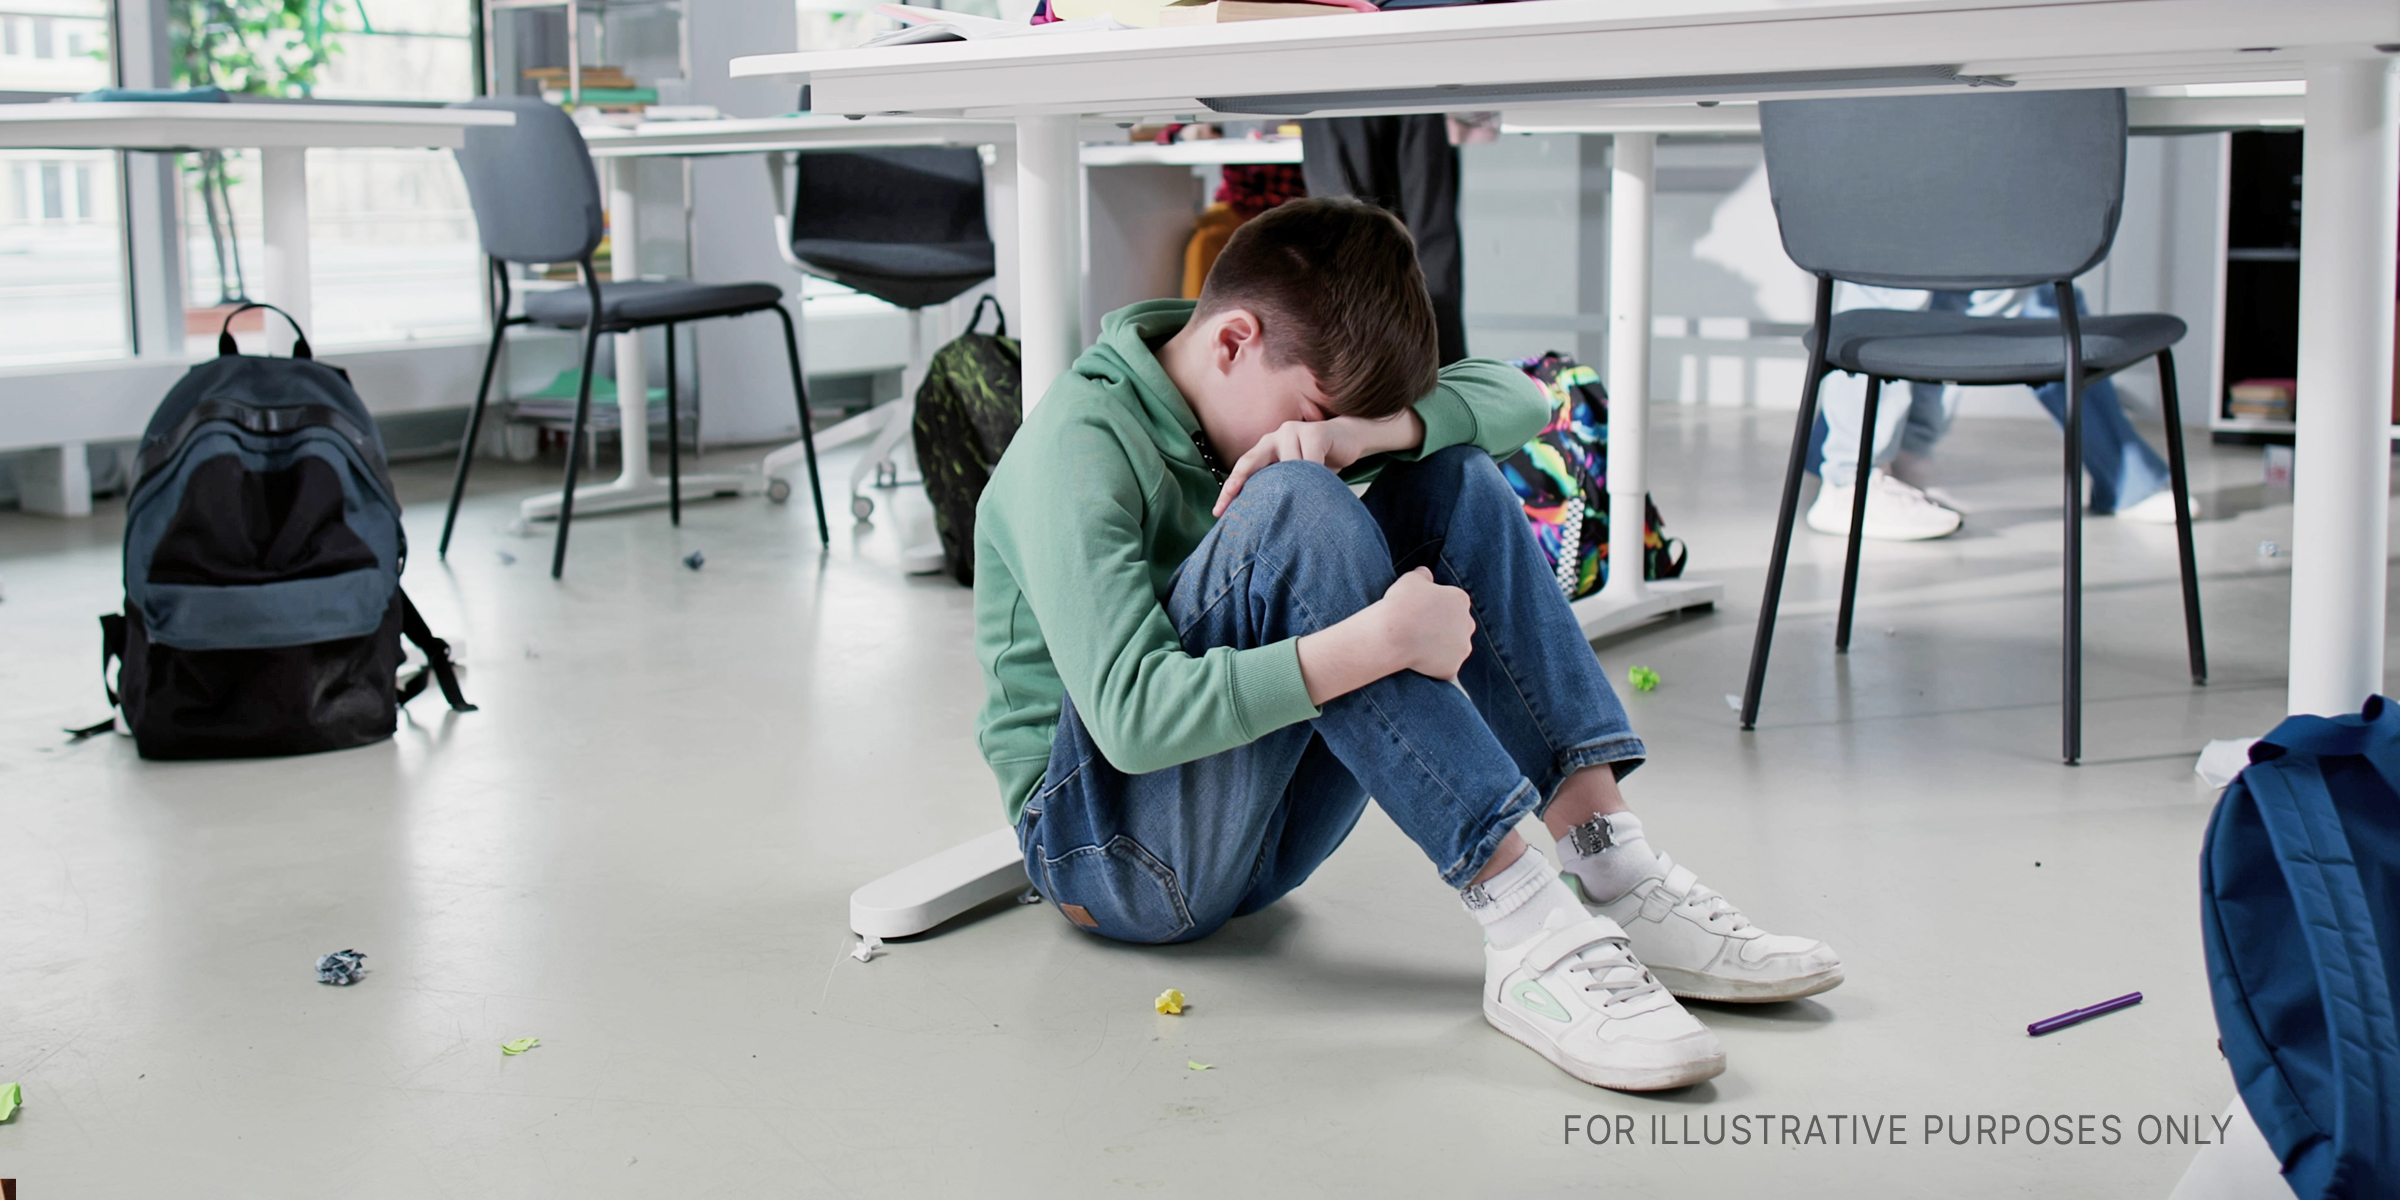 Boy Hugging His Knees and Crying. | Source: Shutterstock